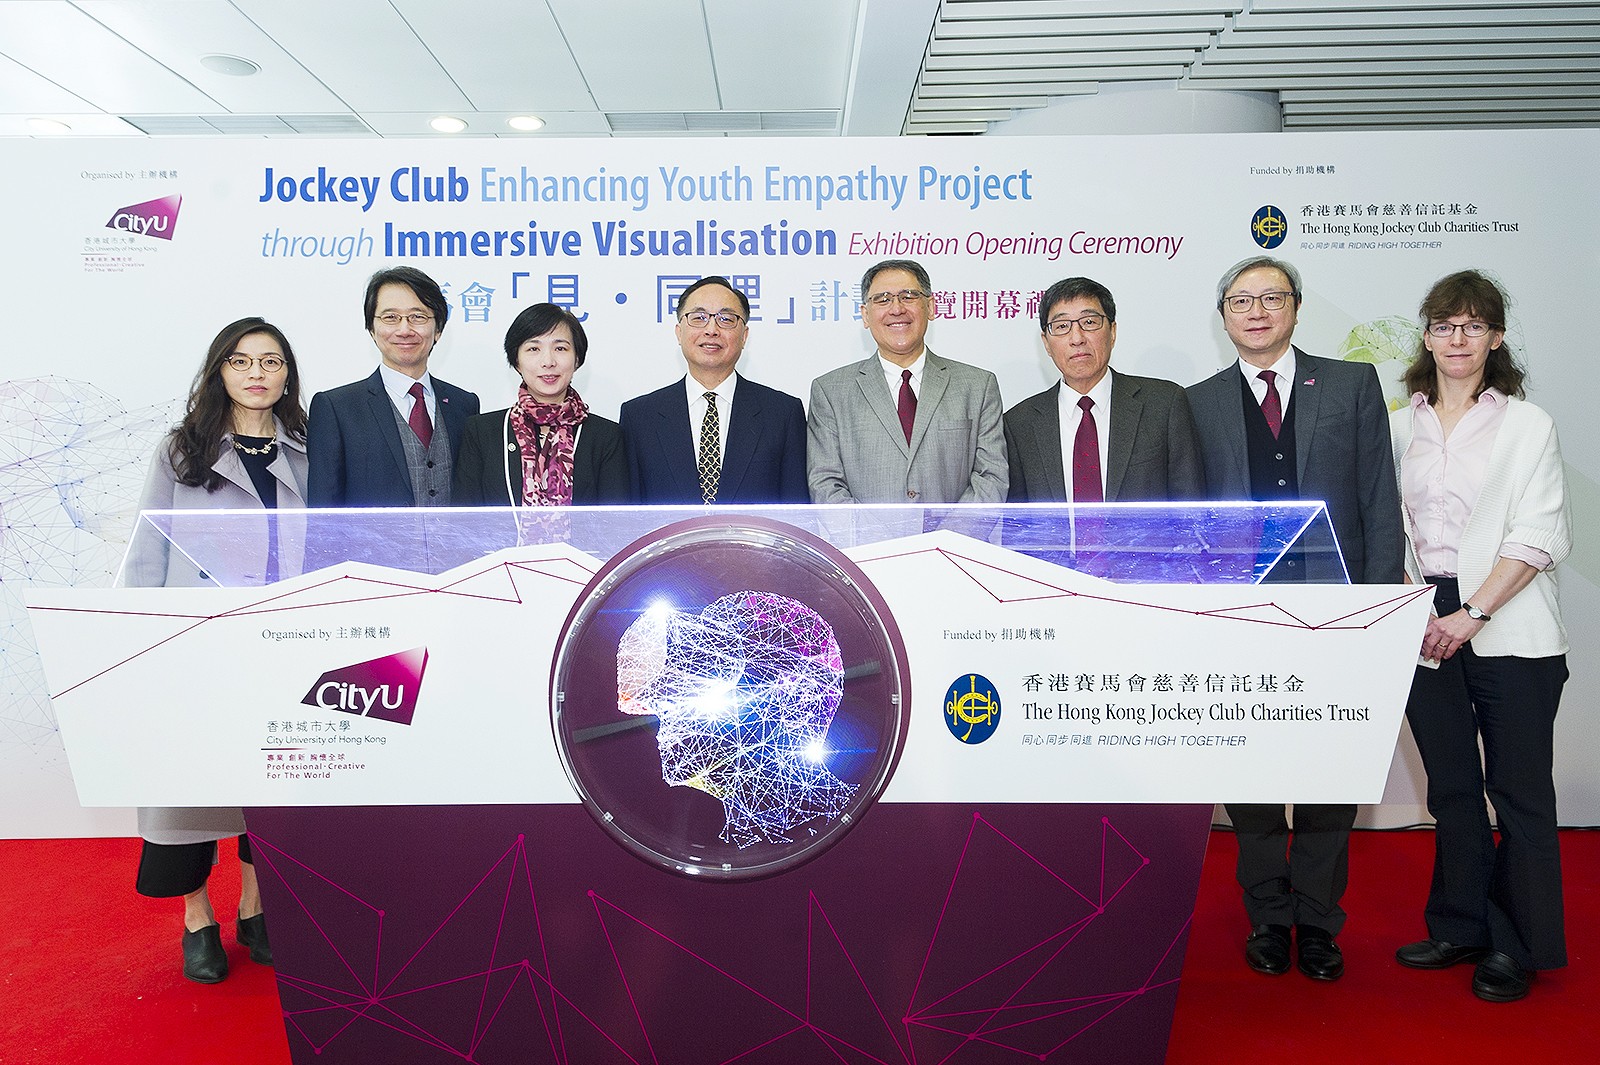 (From left) Dr Lam, Professor Lee, Ms Ying, Mr Yang, Mr Huang, Professor Kuo, Professor Ip, and Professor St-Hilaire.